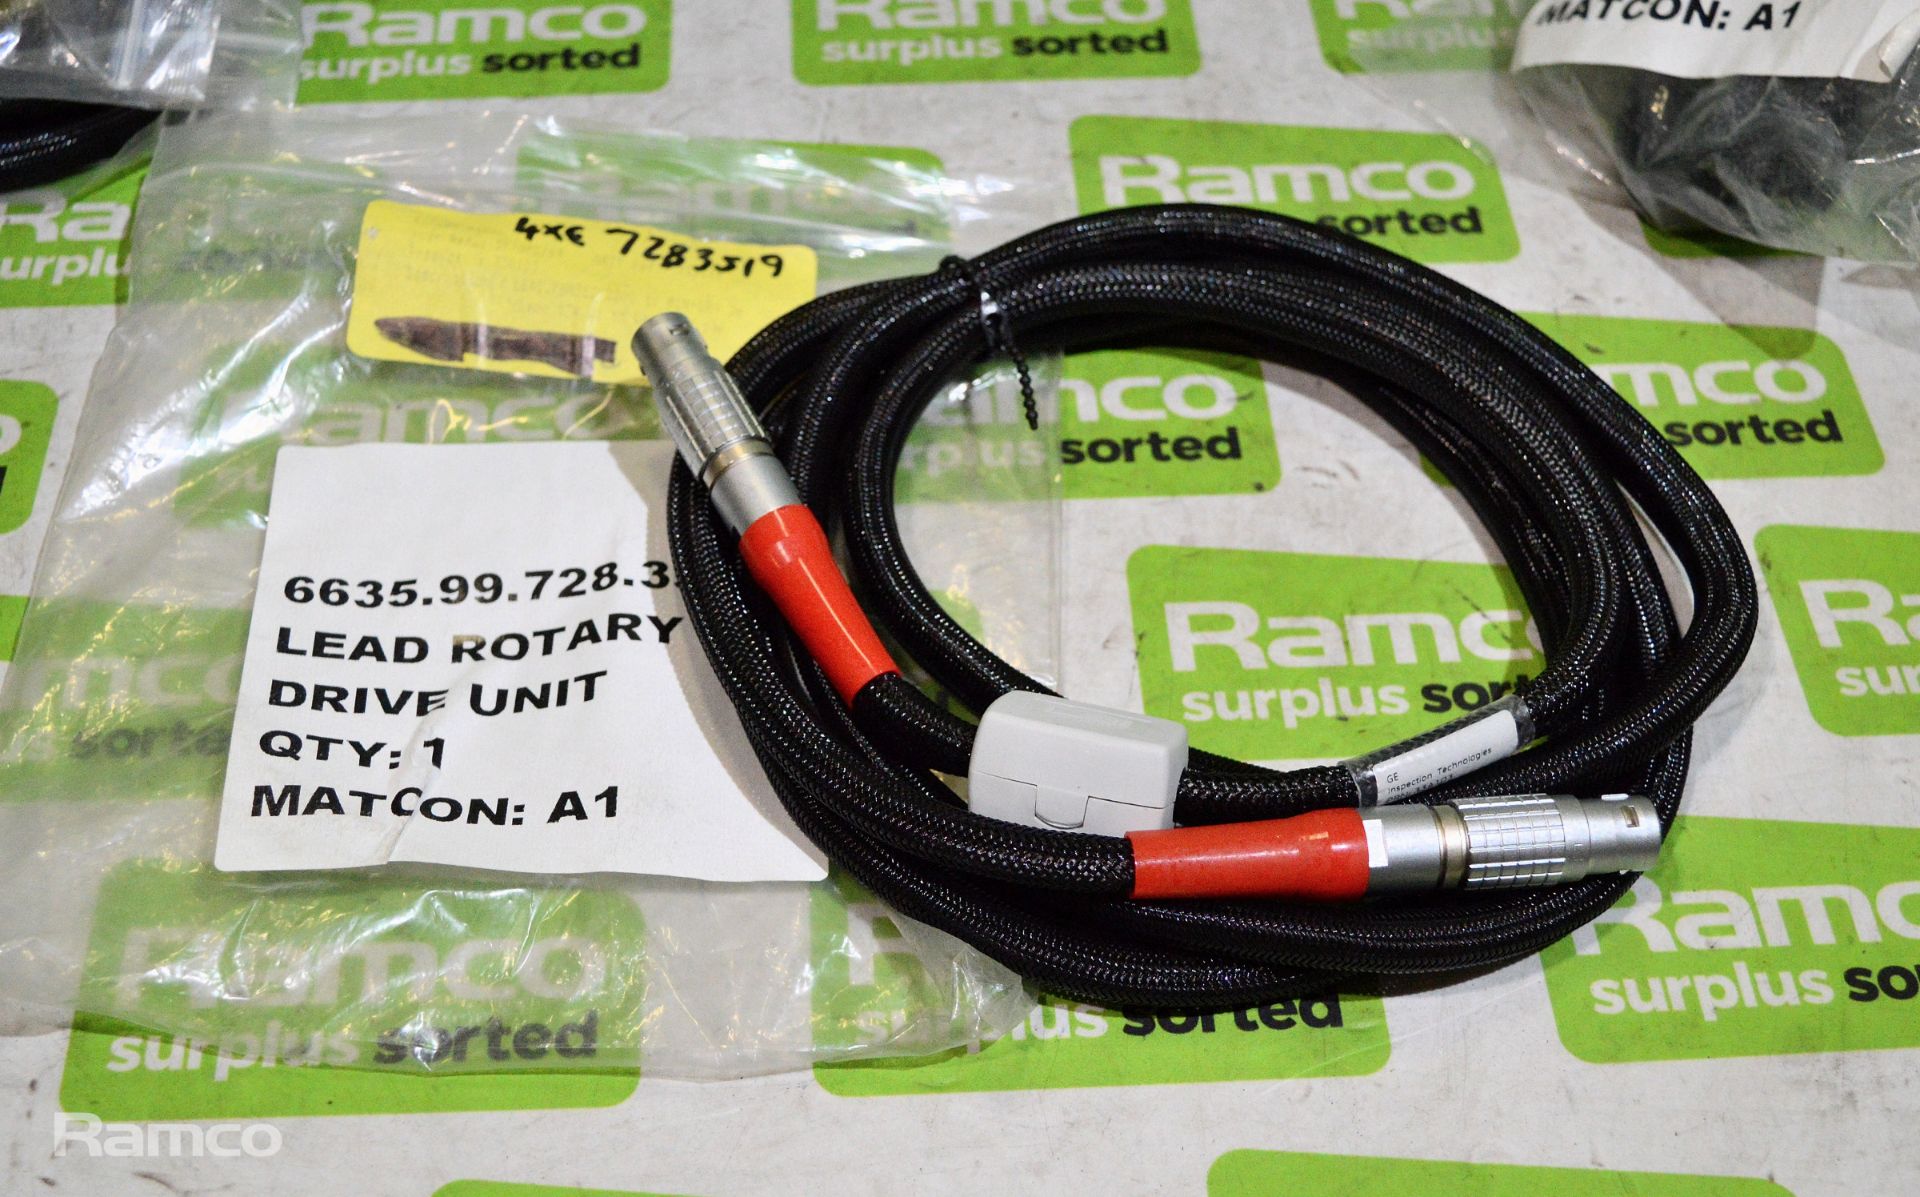 7x Lead Rotary drive unit cables - NSN 6635.99.728.3519 & 3x cable assemblies - NSN 6150.99.648.0462 - Image 4 of 5